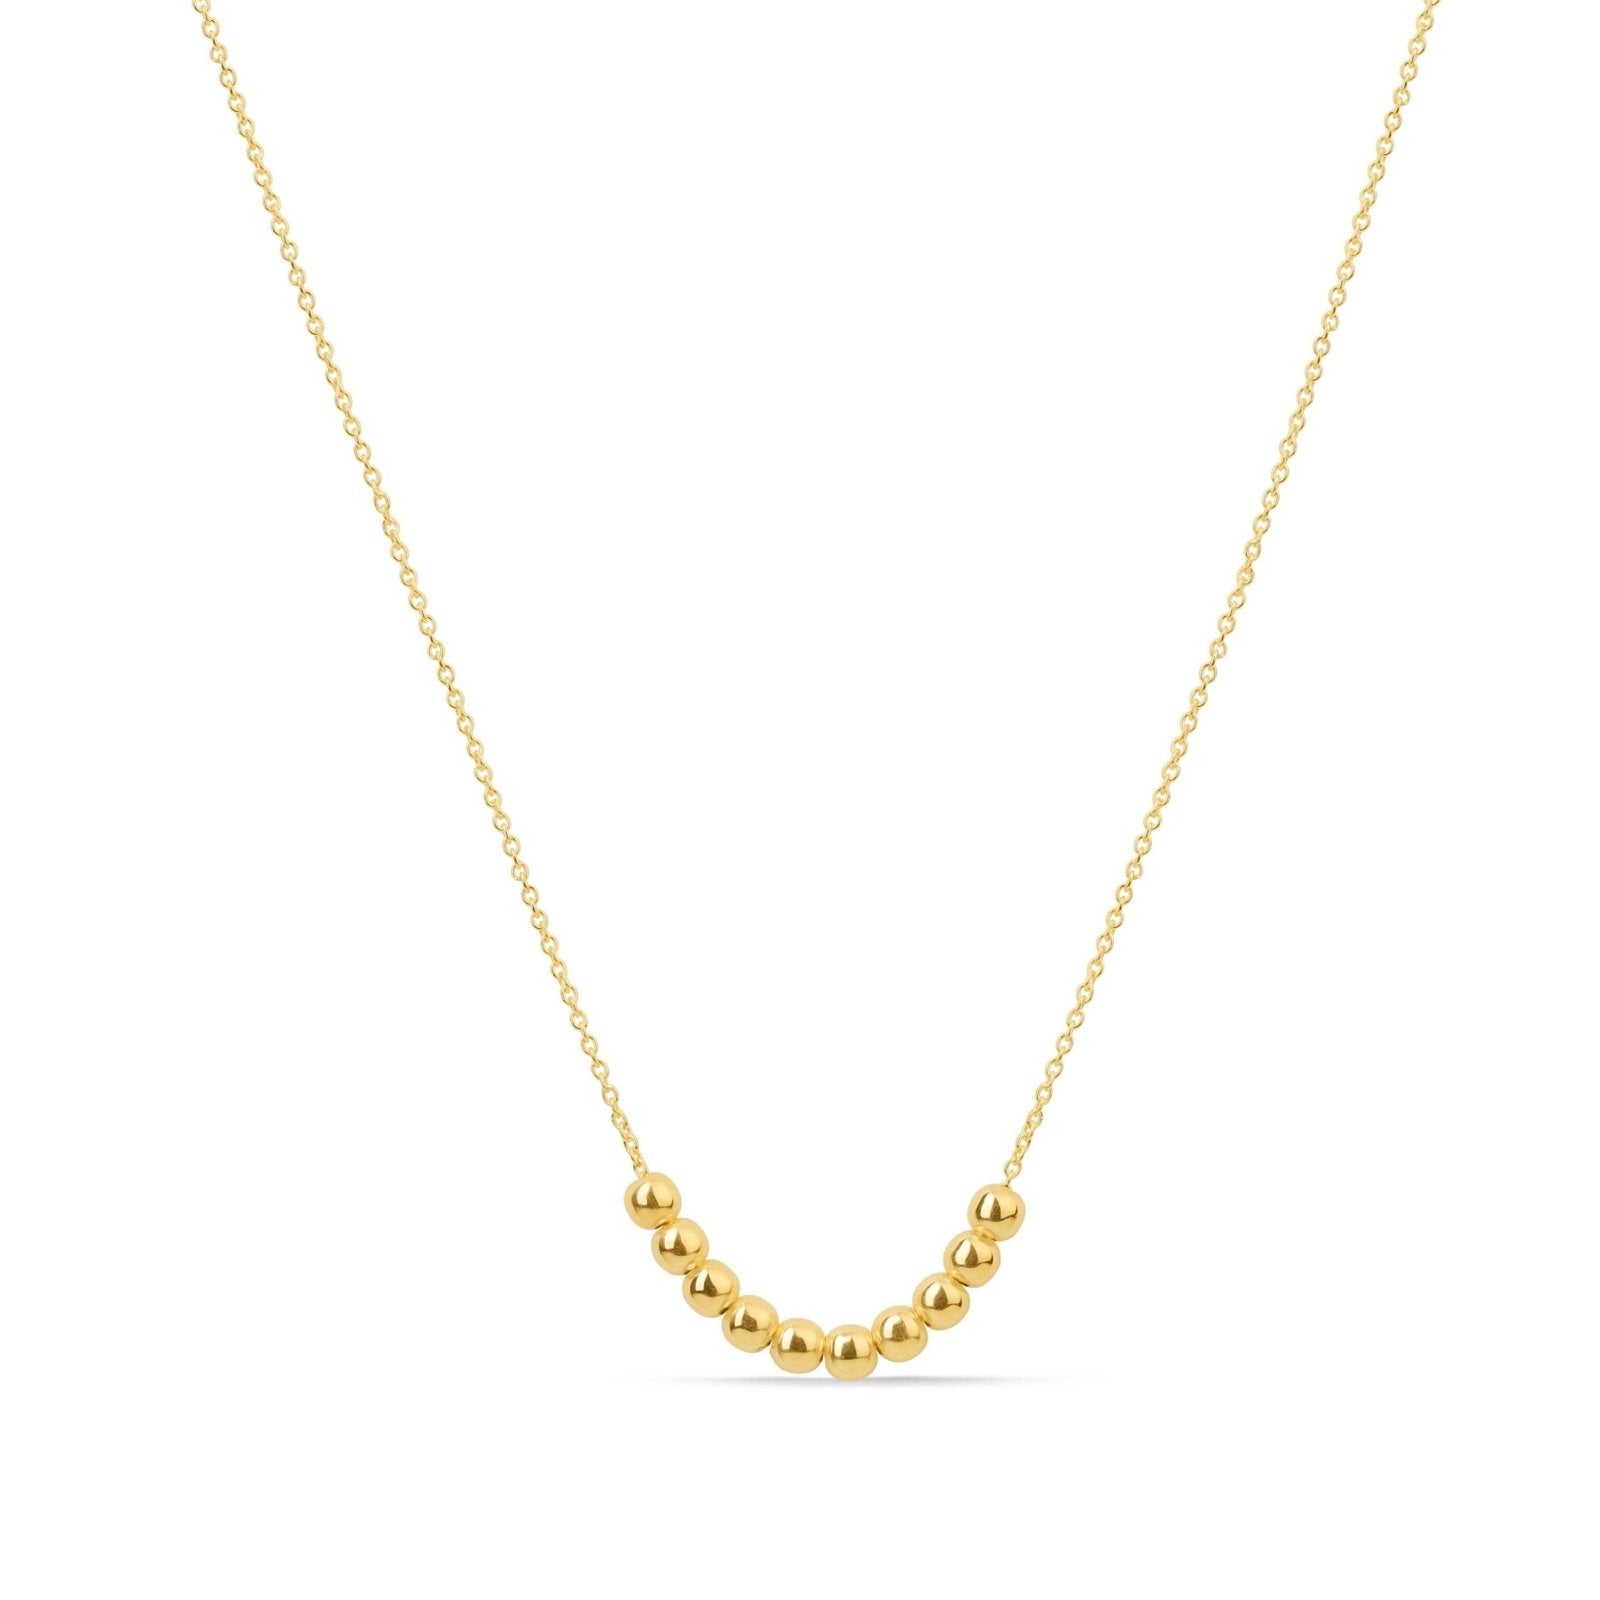 Sliding Bead Necklace in Solid Yellow Gold Necklaces Estella Collection #product_description# 17653 Layering Necklace Make Collection Ready to Ship #tag4# #tag5# #tag6# #tag7# #tag8# #tag9# #tag10#